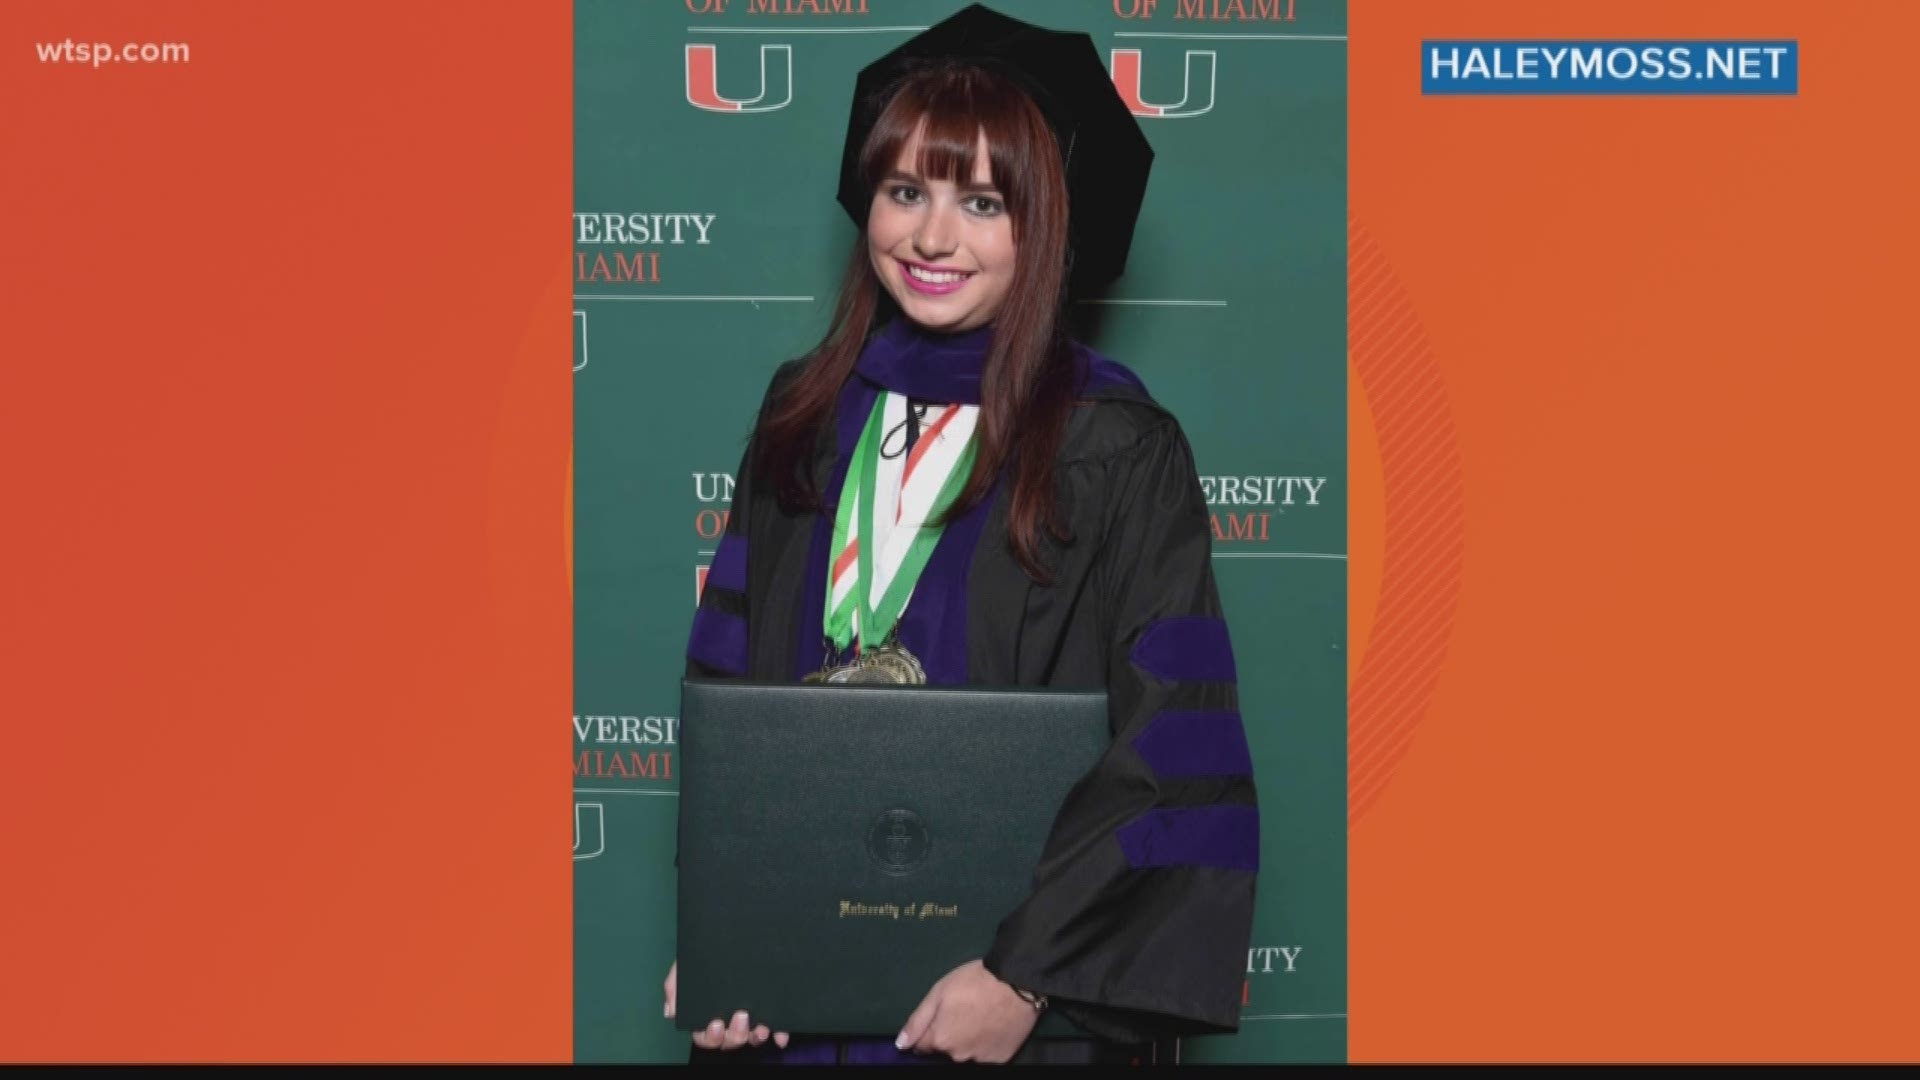 Haley Moss became the first person who was openly autistic to achieve the honor, the Sun-Sentinel reported.